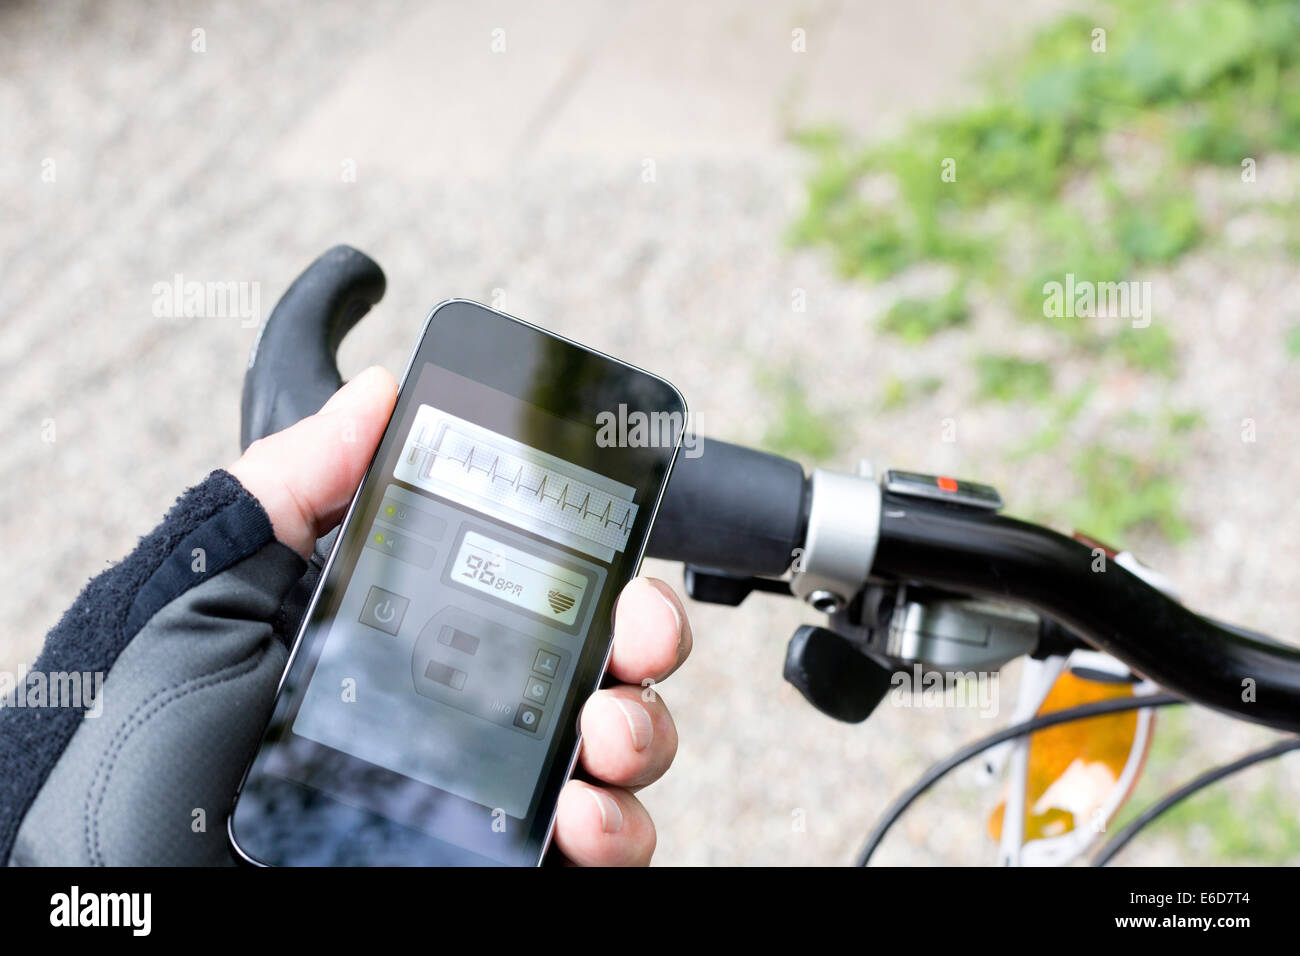 Hand of mountain biker holding smartphone with heart rate monitor Stock Photo